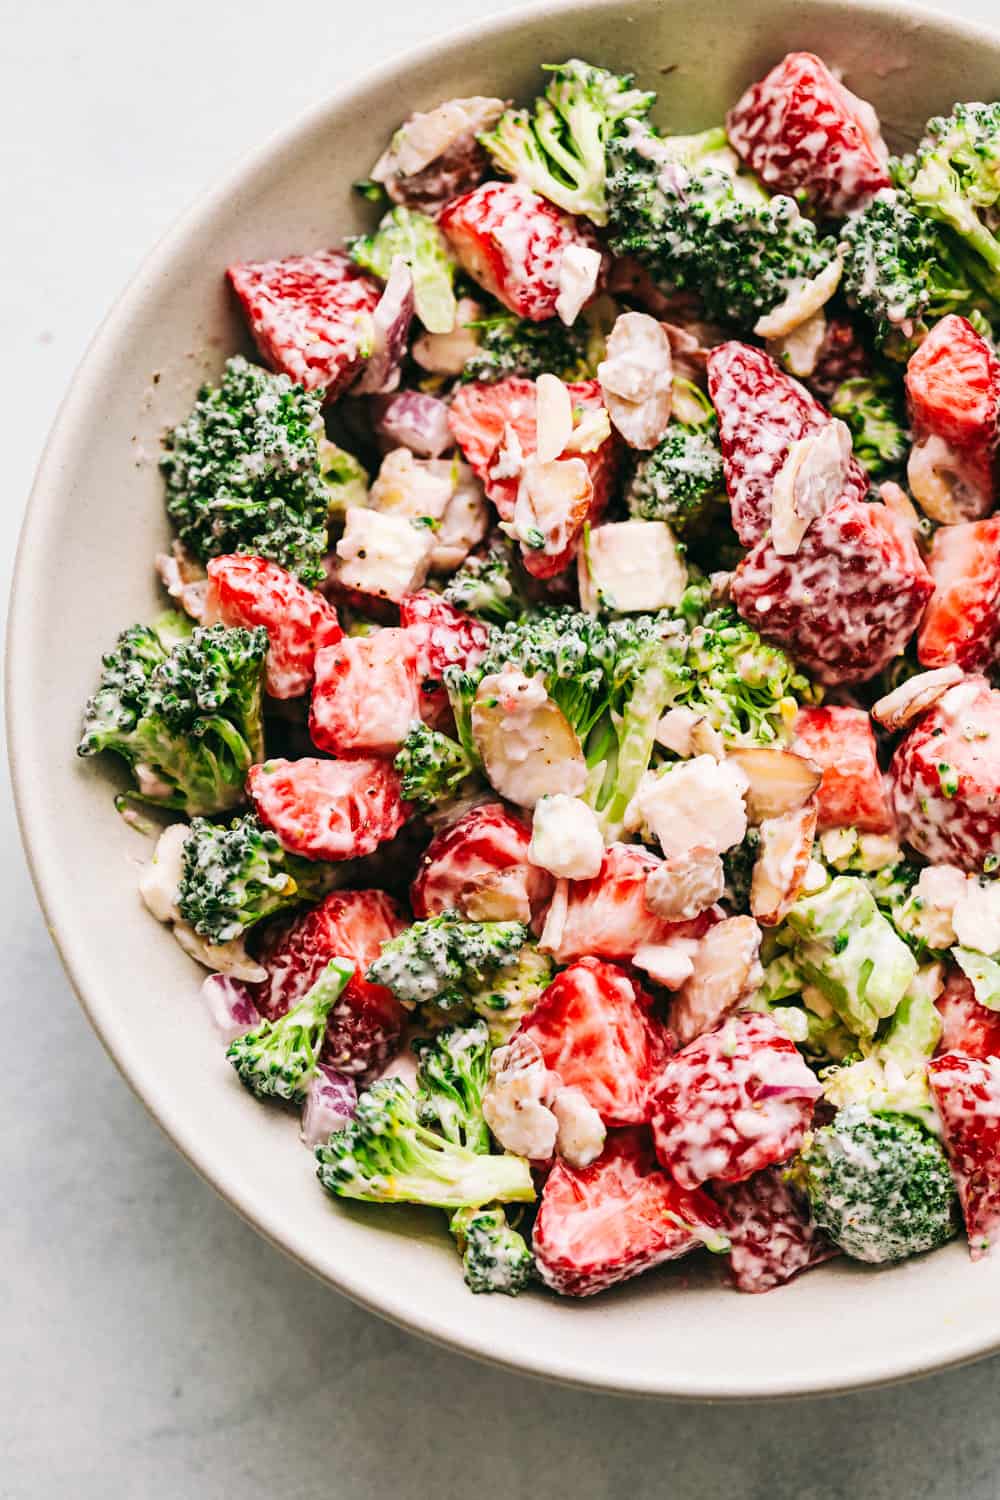 A bowl of the strawberry and broccoli salad, another one of the unique strawberry recipes